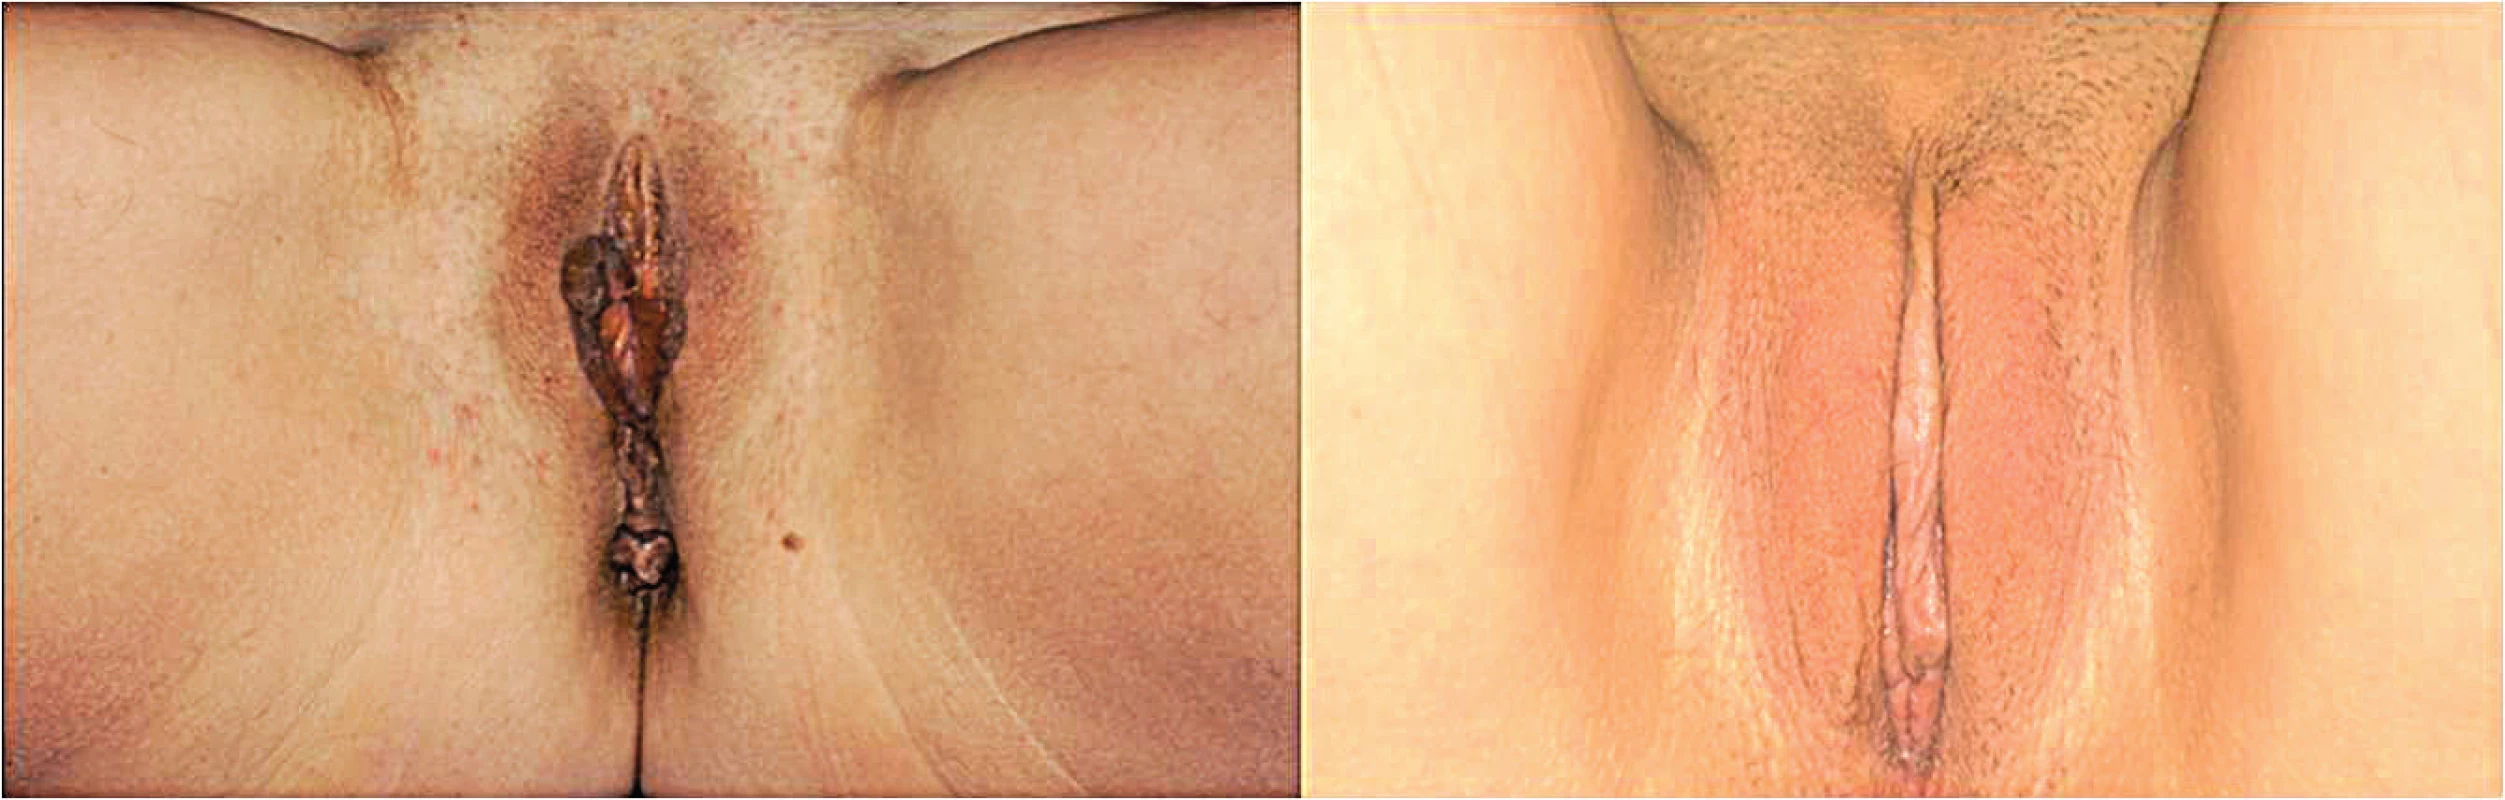 (Left) Preoperative view in a 31 years old patient. (Right) Post-operative view at 12 months